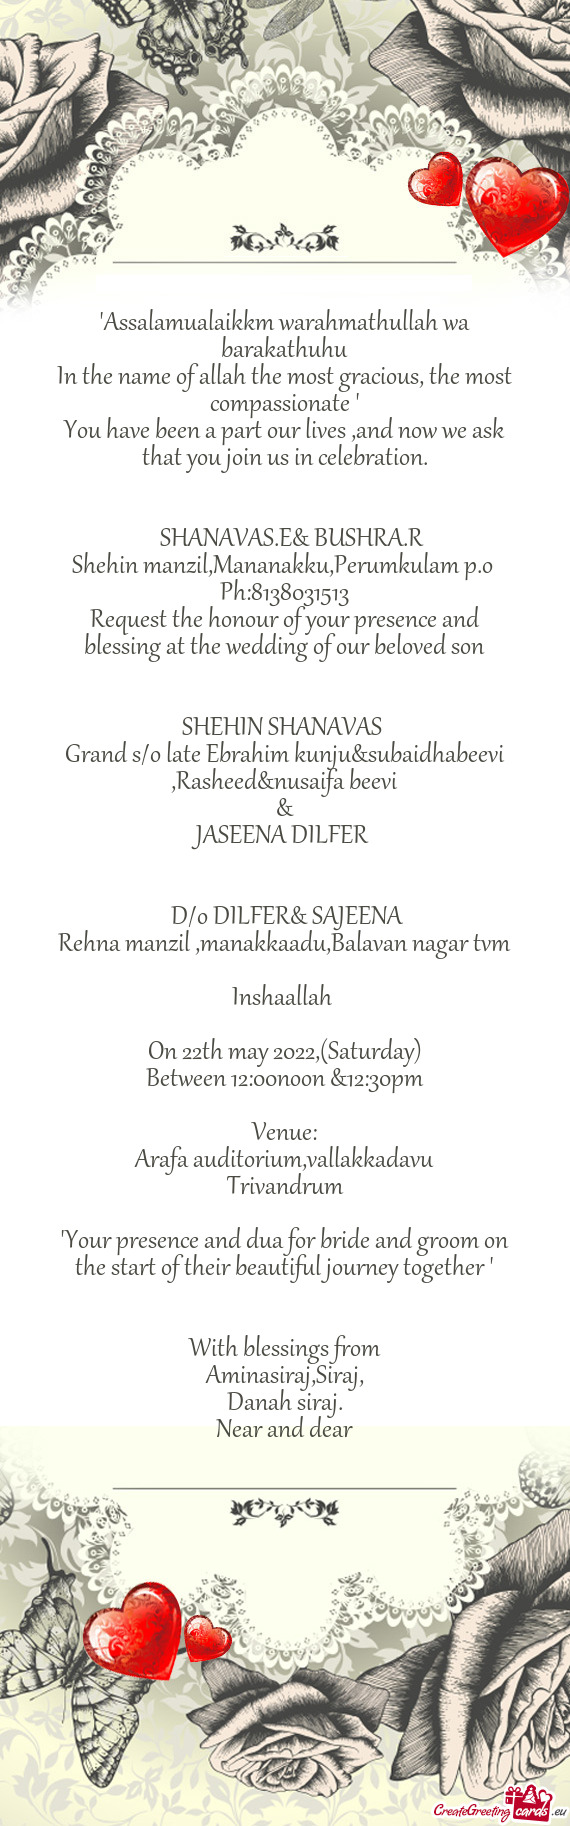 Request the honour of your presence and blessing at the wedding of our beloved son